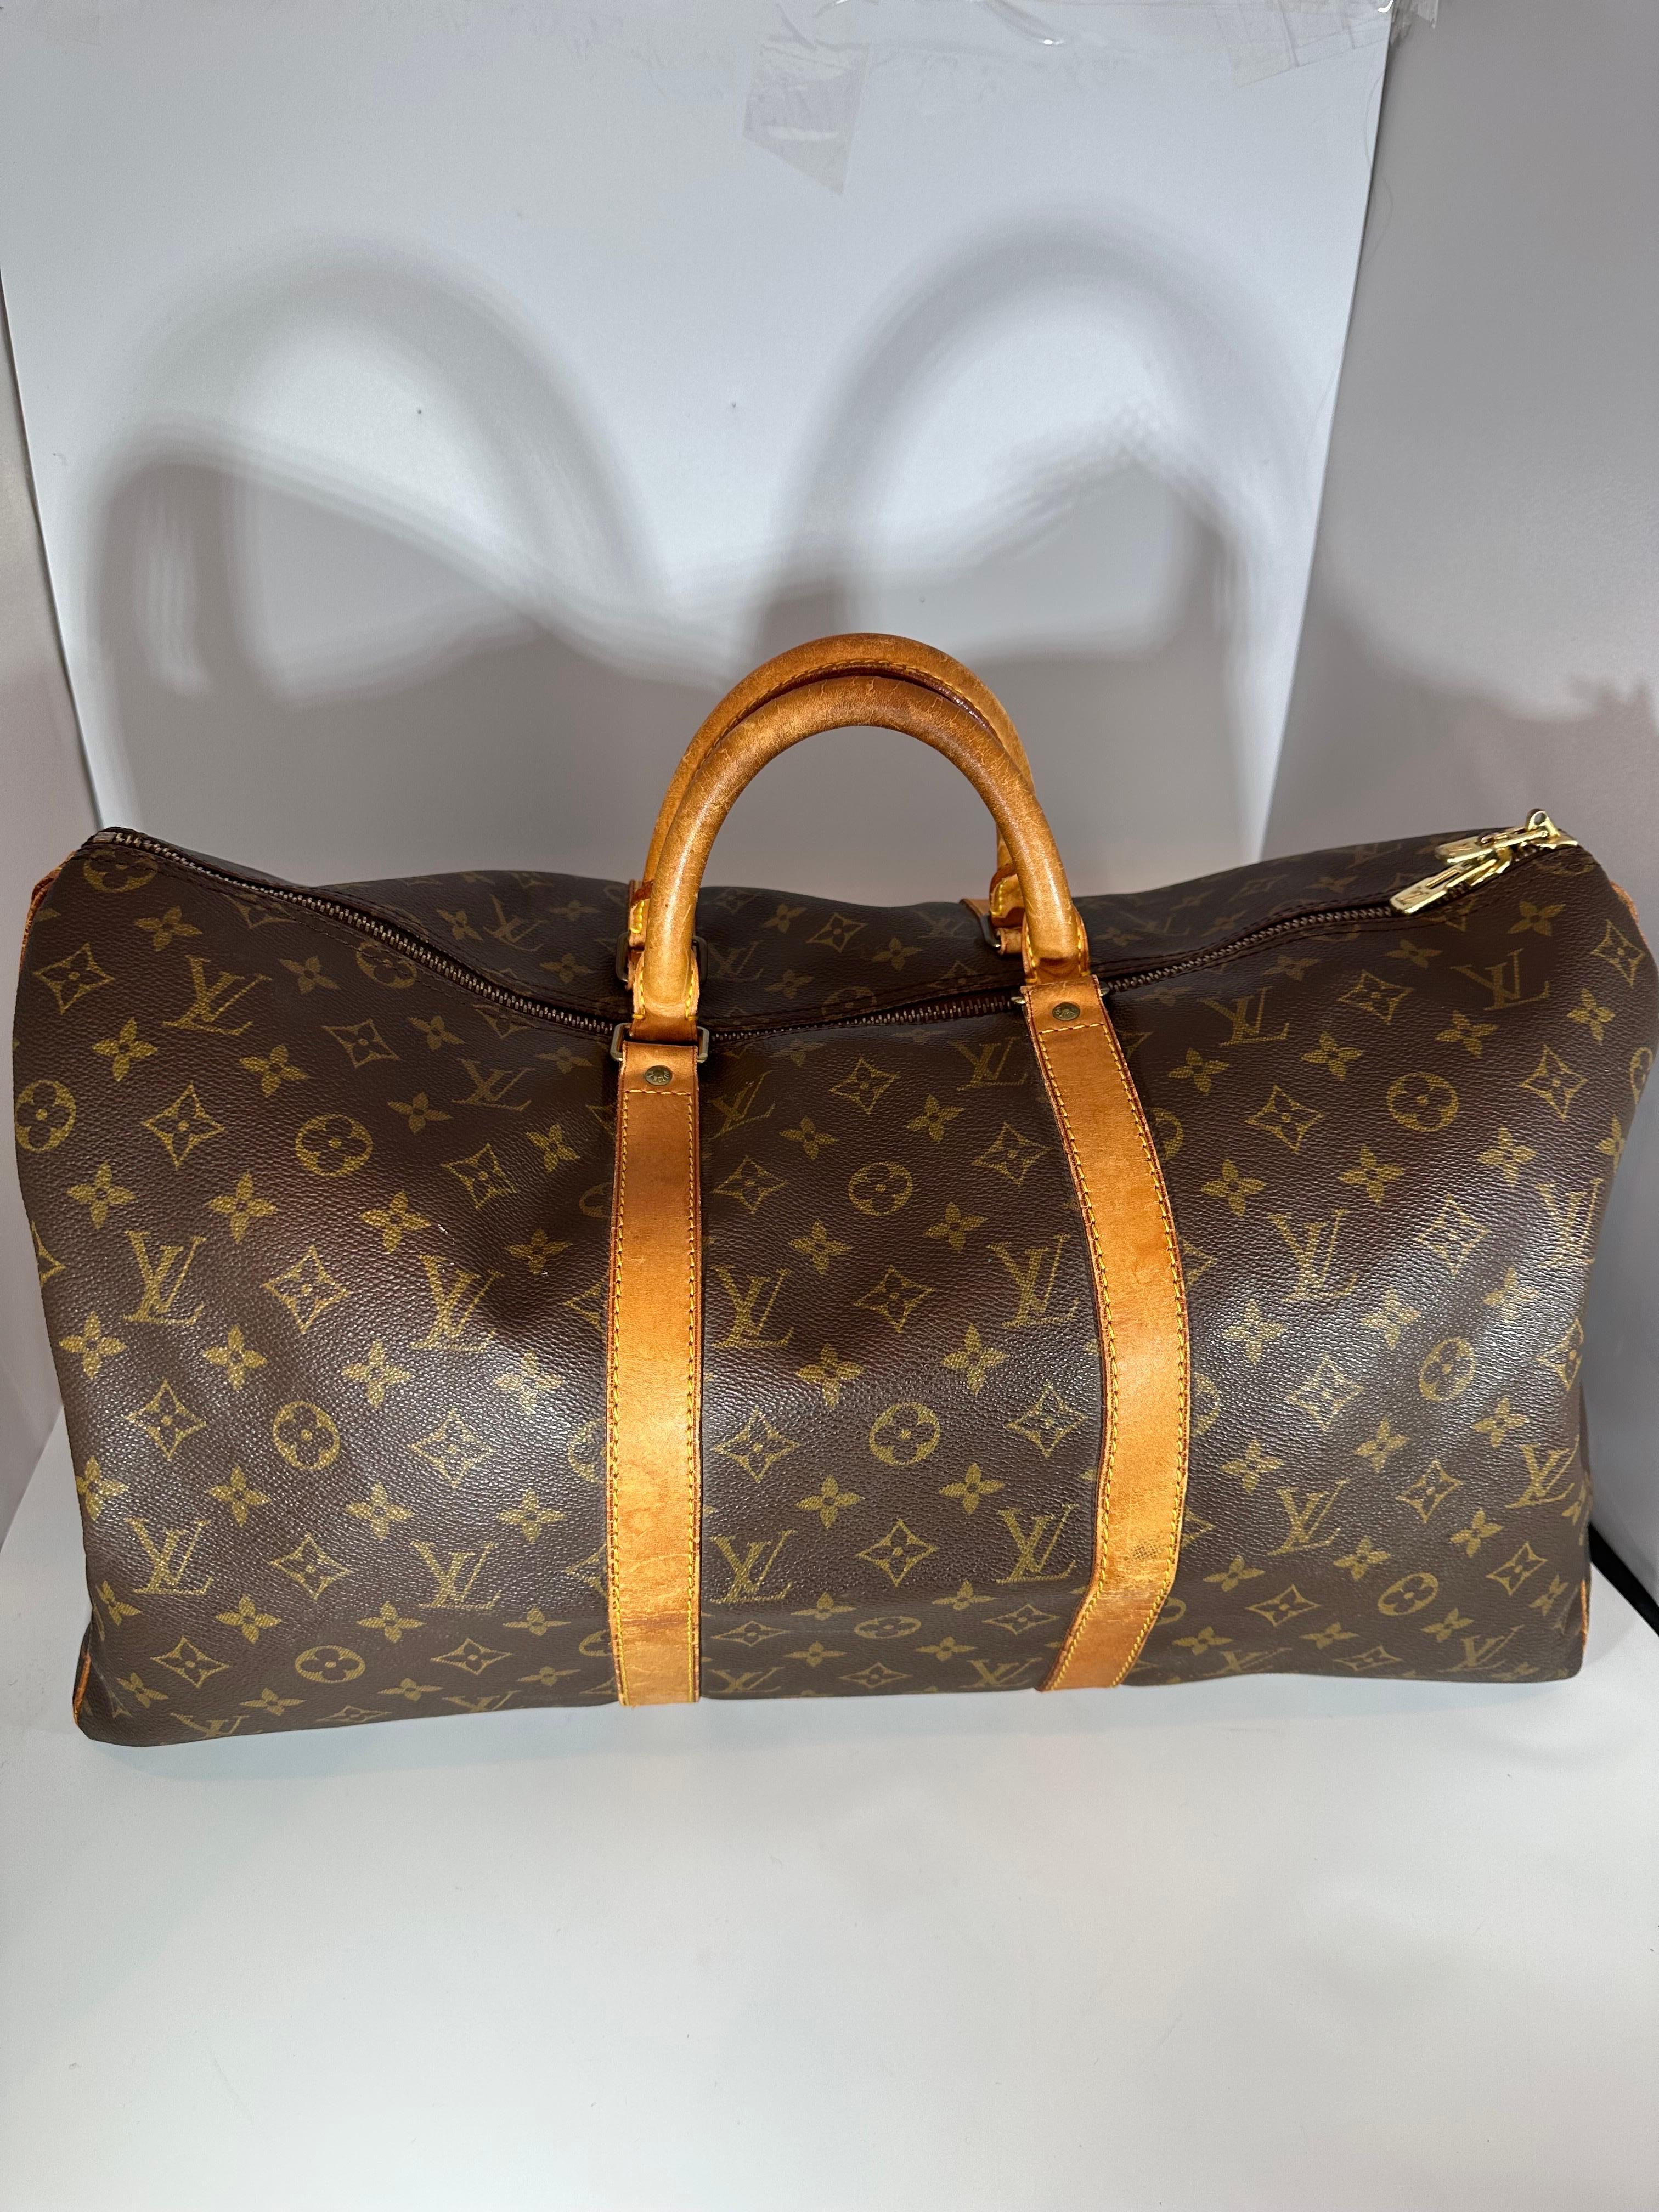 LOUIS VUITTON Brown Monogram Canvas Keepall  Luggage Bag  50, Boston Bag In Good Condition For Sale In New York, NY